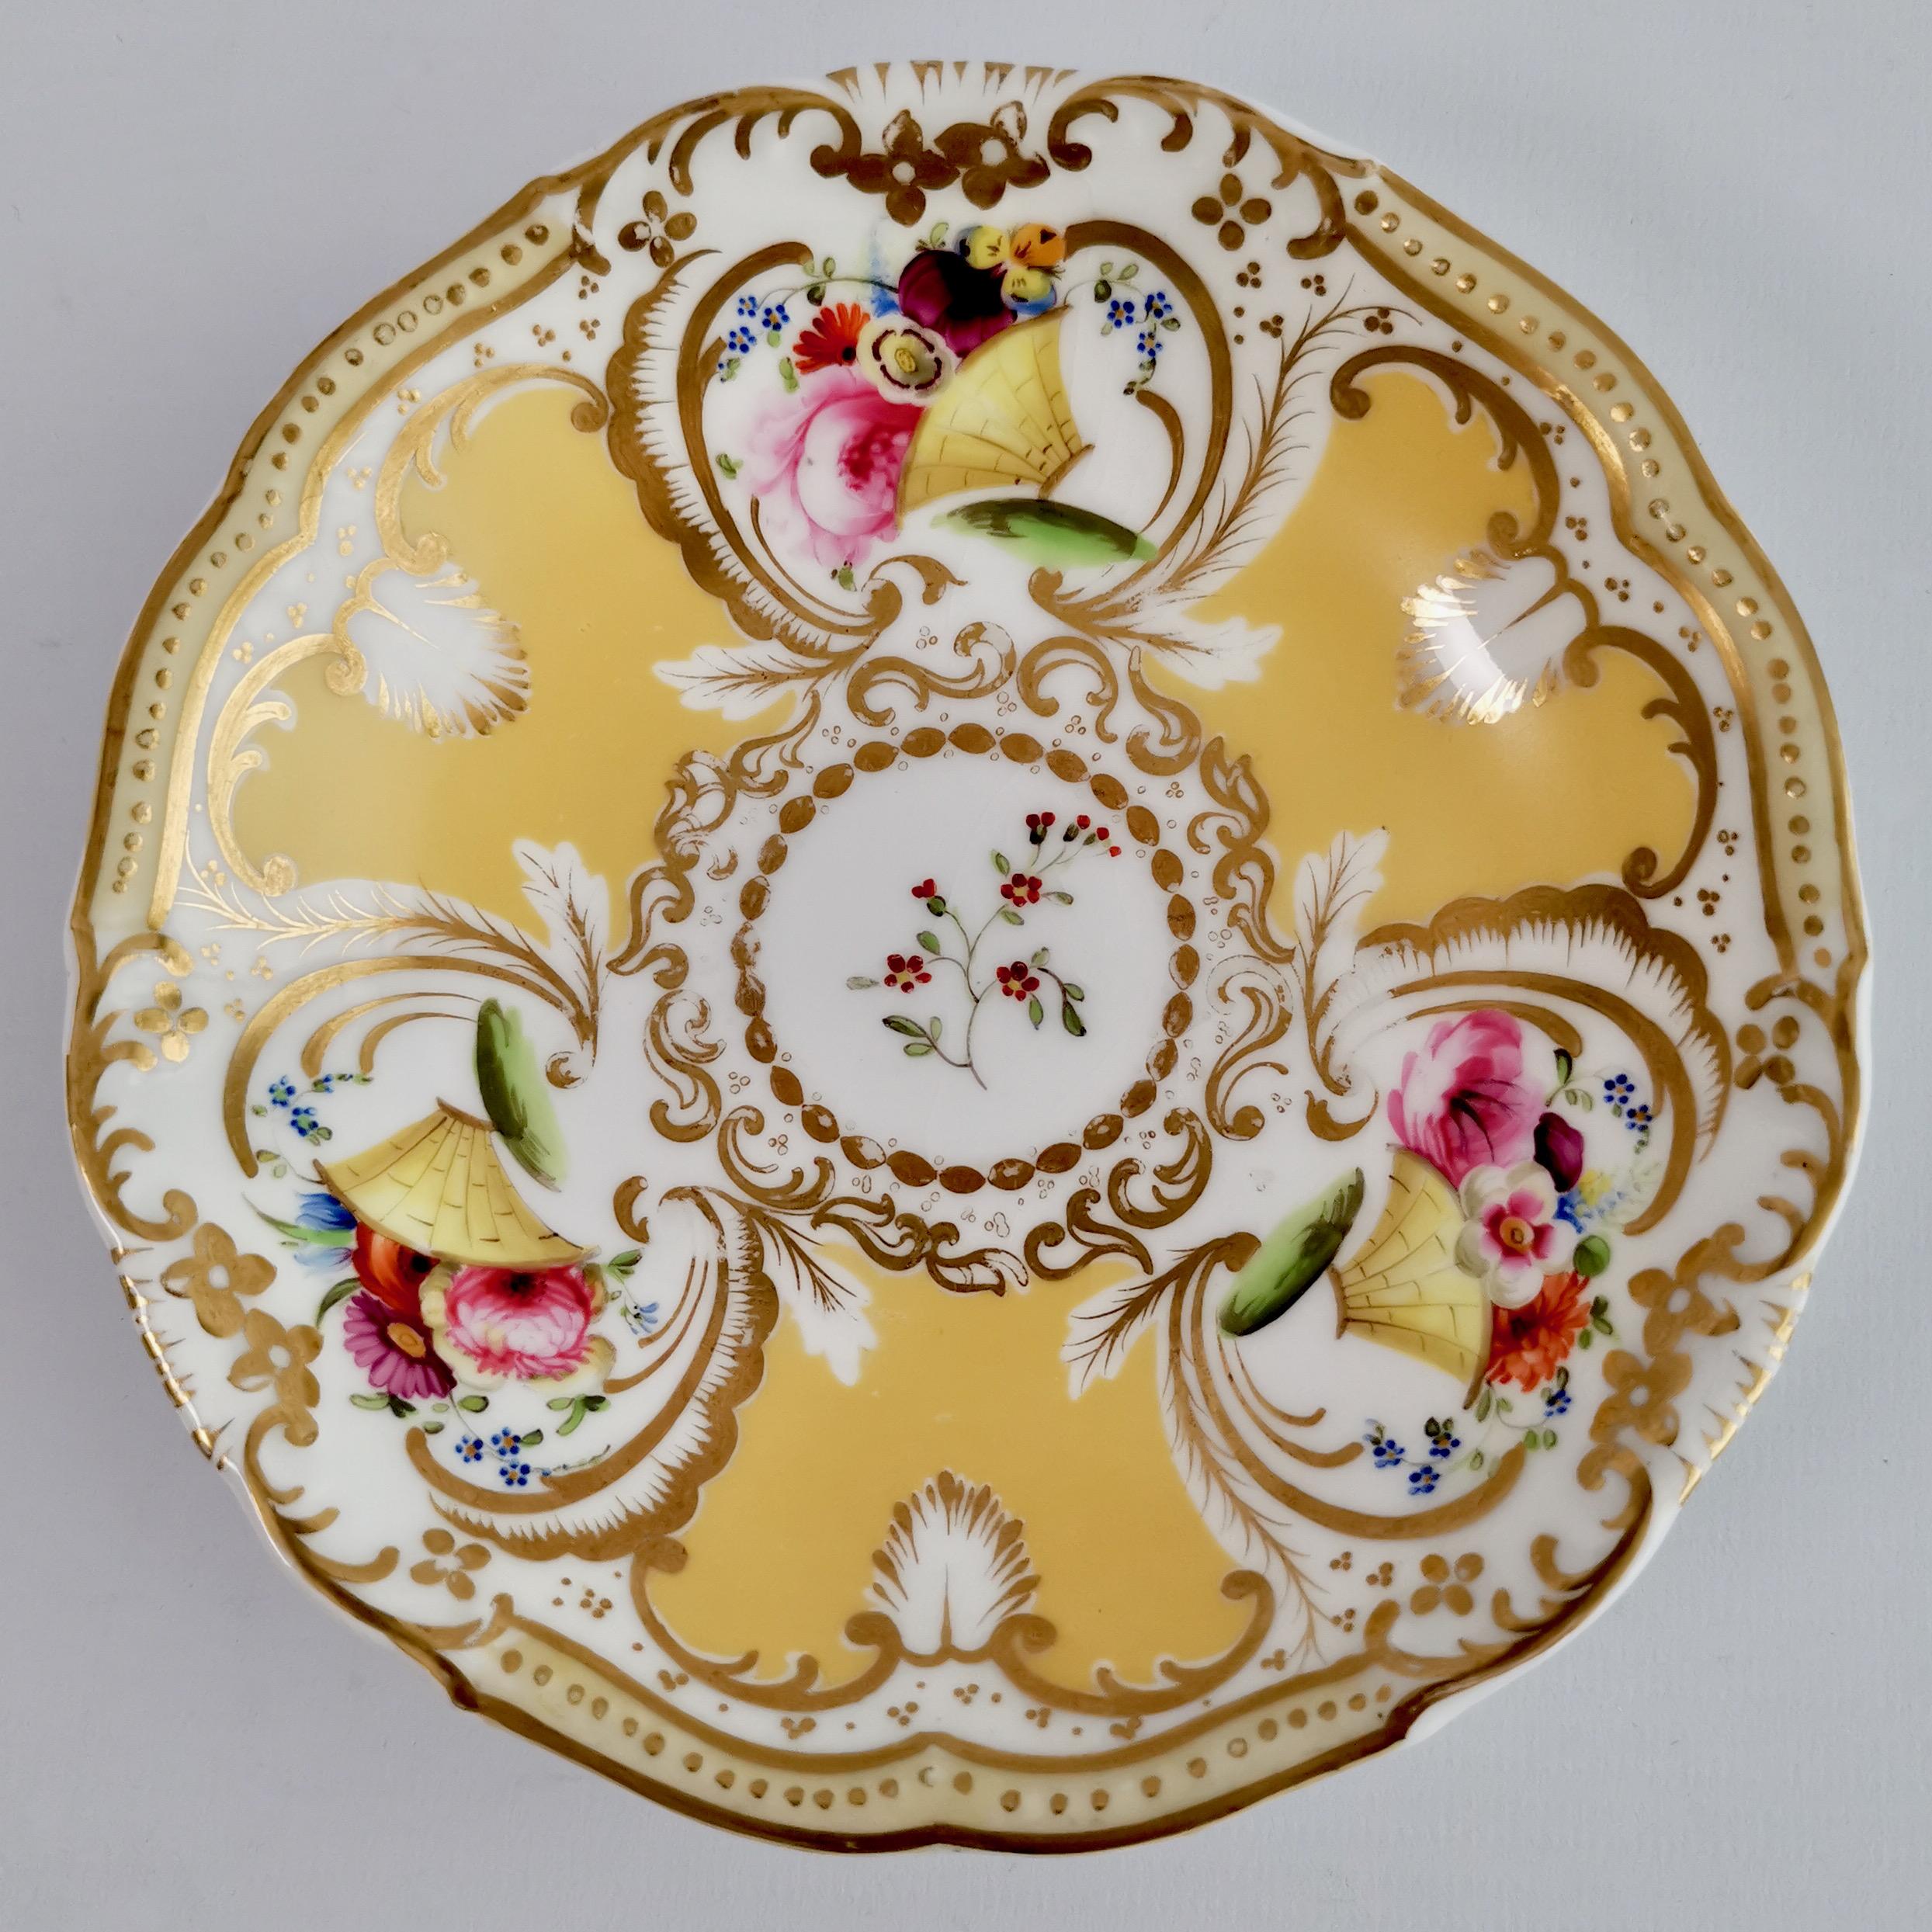 Hand-Painted Grainger Worcester Teacup, Yellow, Gilt and Flowers, Rococo Revival, circa 1835